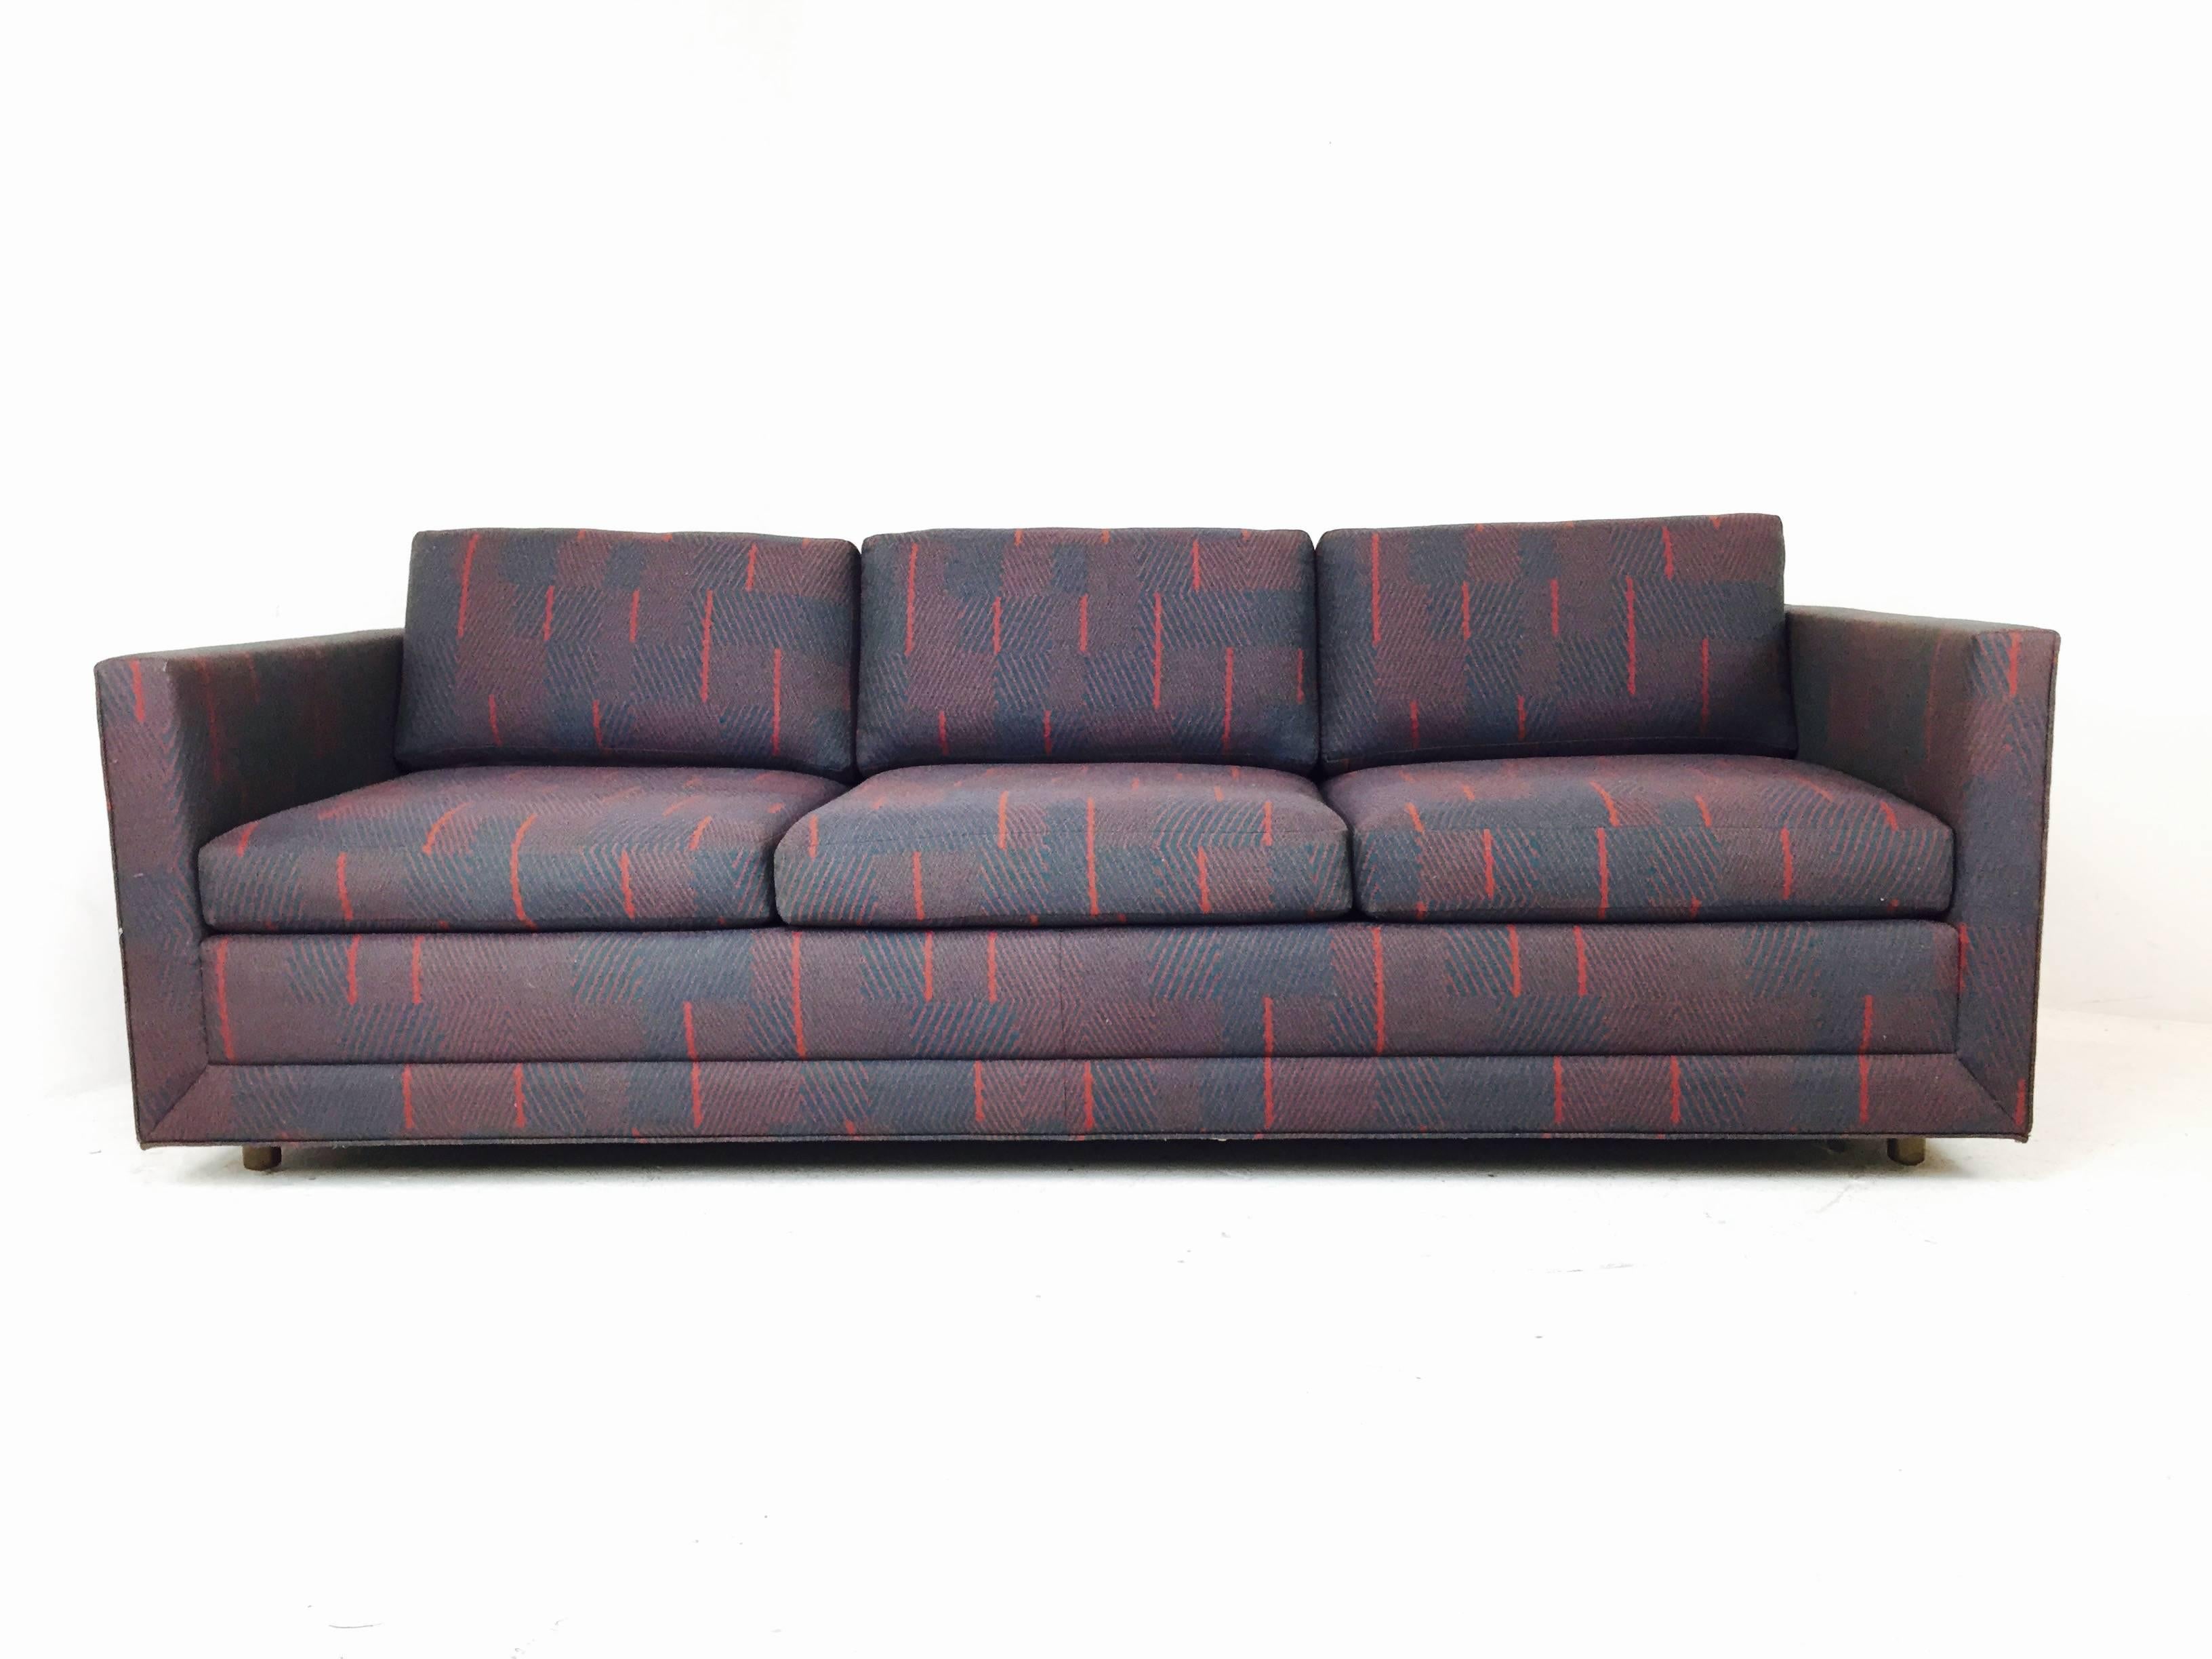 Handsome tuxedo sofa by Martin Brattrud. Upholstery is in good vintage condition, circa 1980s.

Dimensions: 84" W x 33" D x 24.5" T.
Seat height 17".